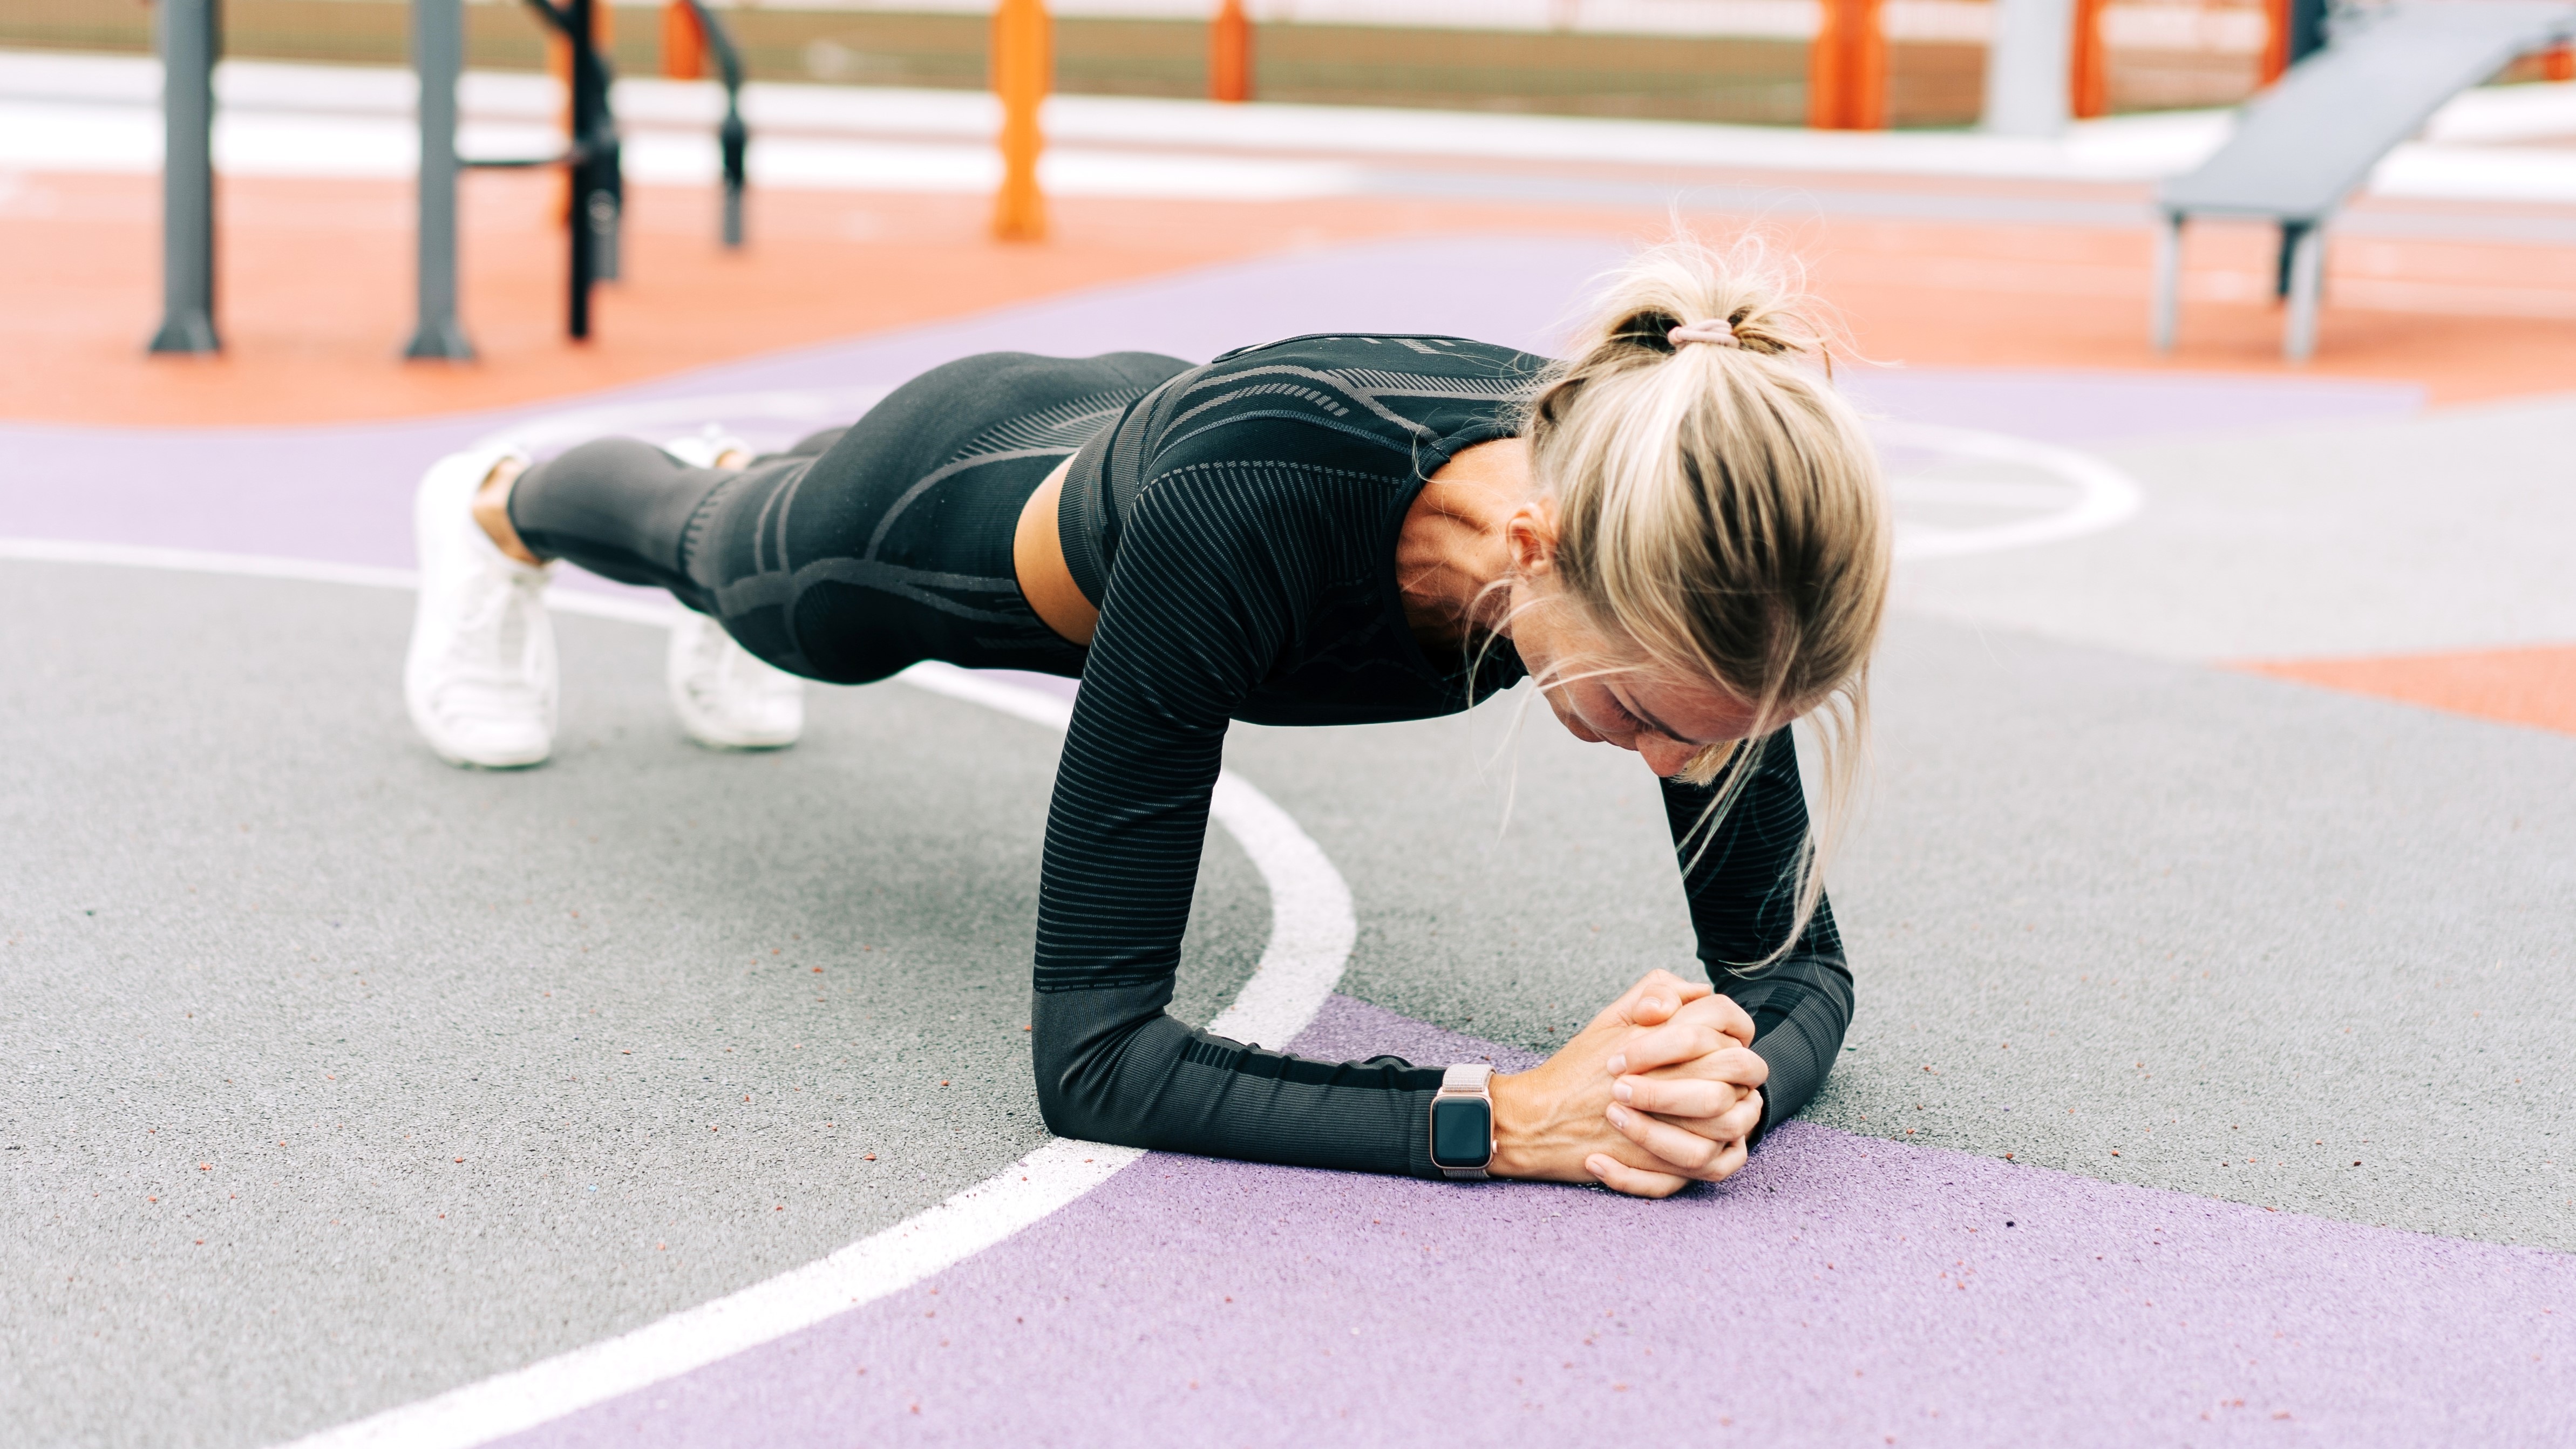 I did a plank every day for a month and here's what happened to my running